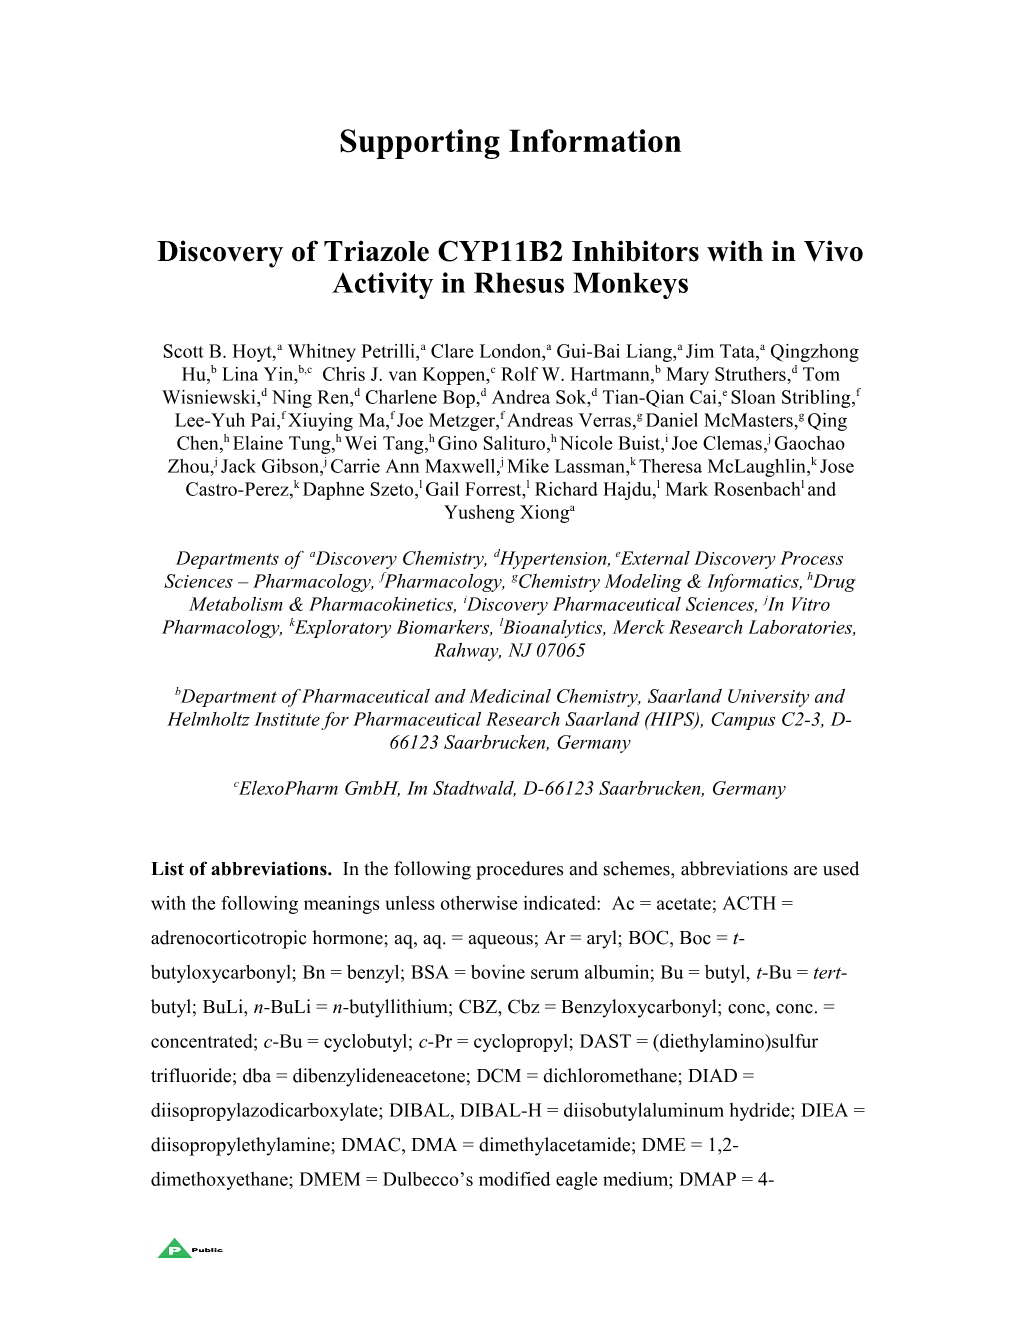 Discovery of Triazole CYP11B2 Inhibitors with in V Ivo Activity in Rhesus Monkeys